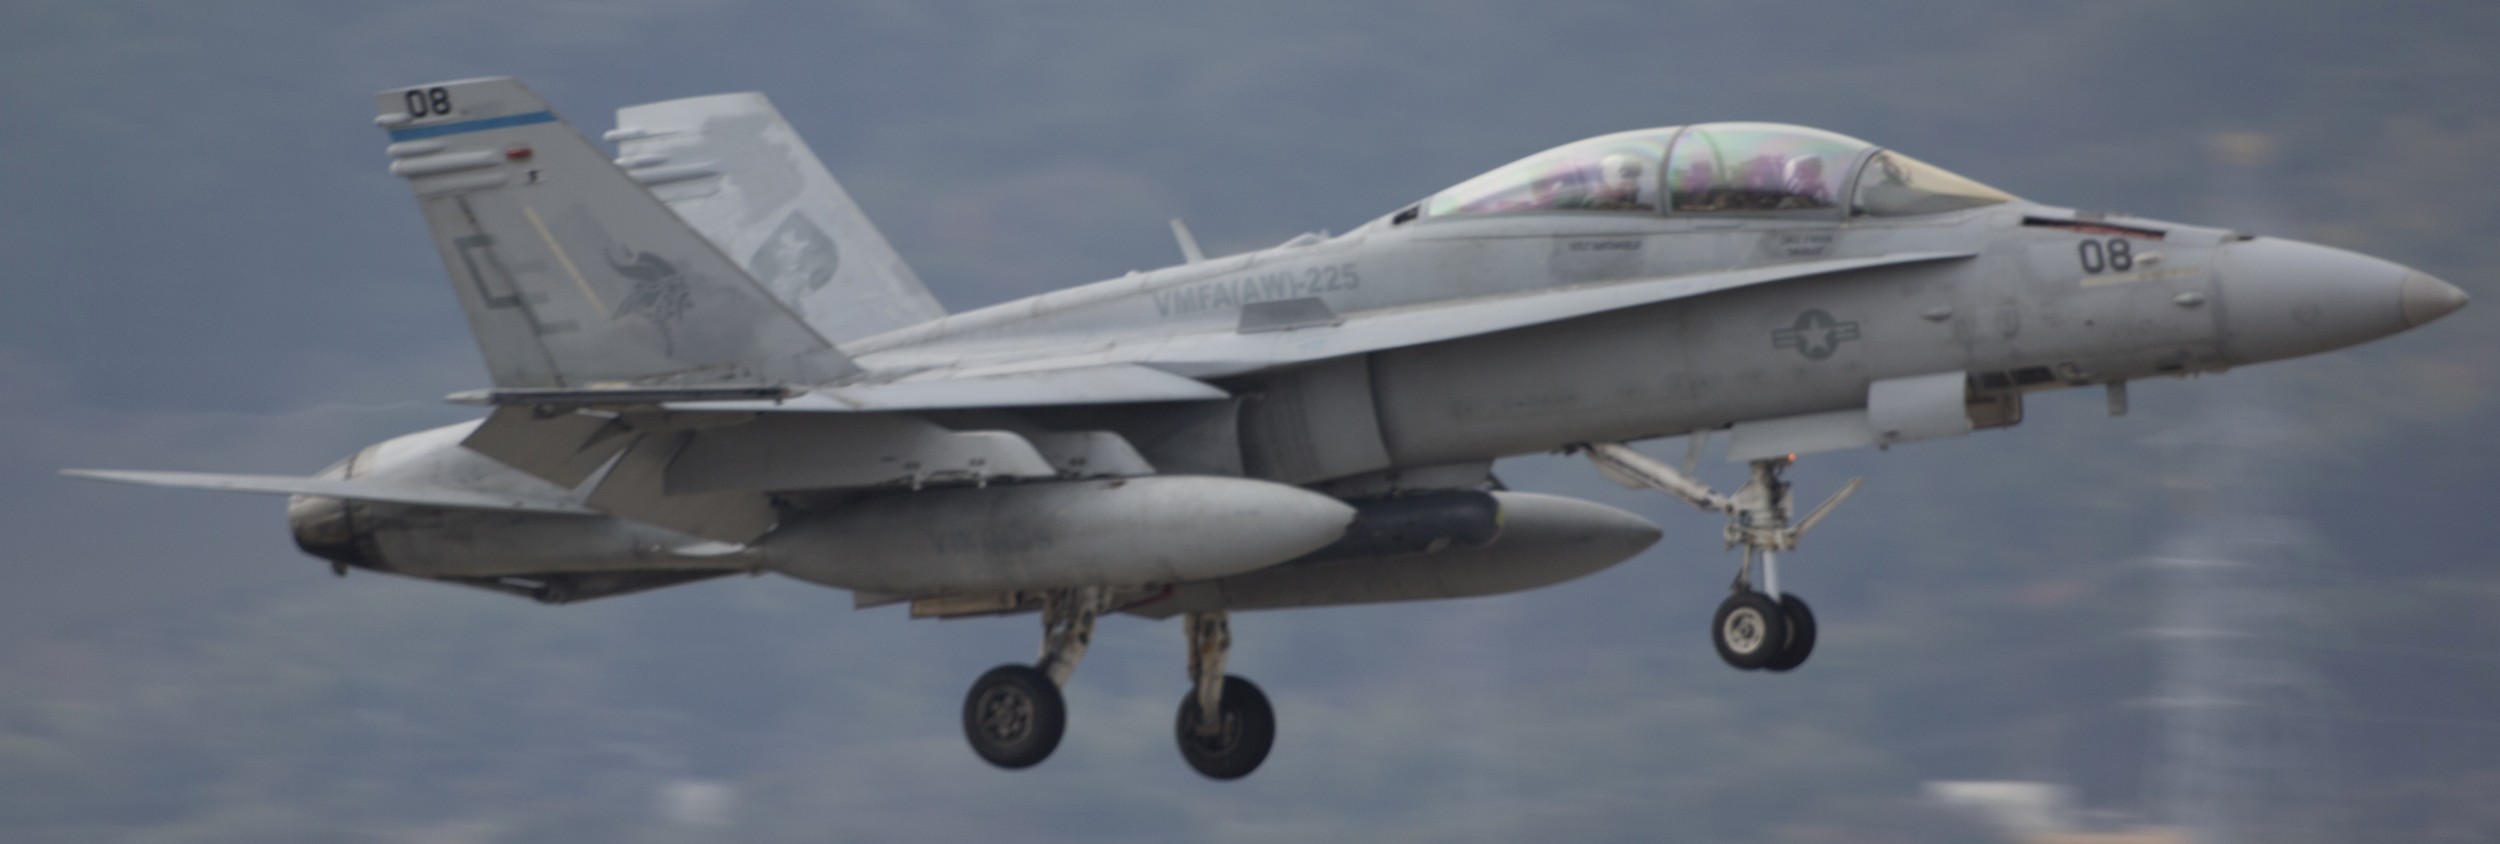 vmfa(aw)-225 vikings marine fighter attack squadron f/a-18d hornet 17